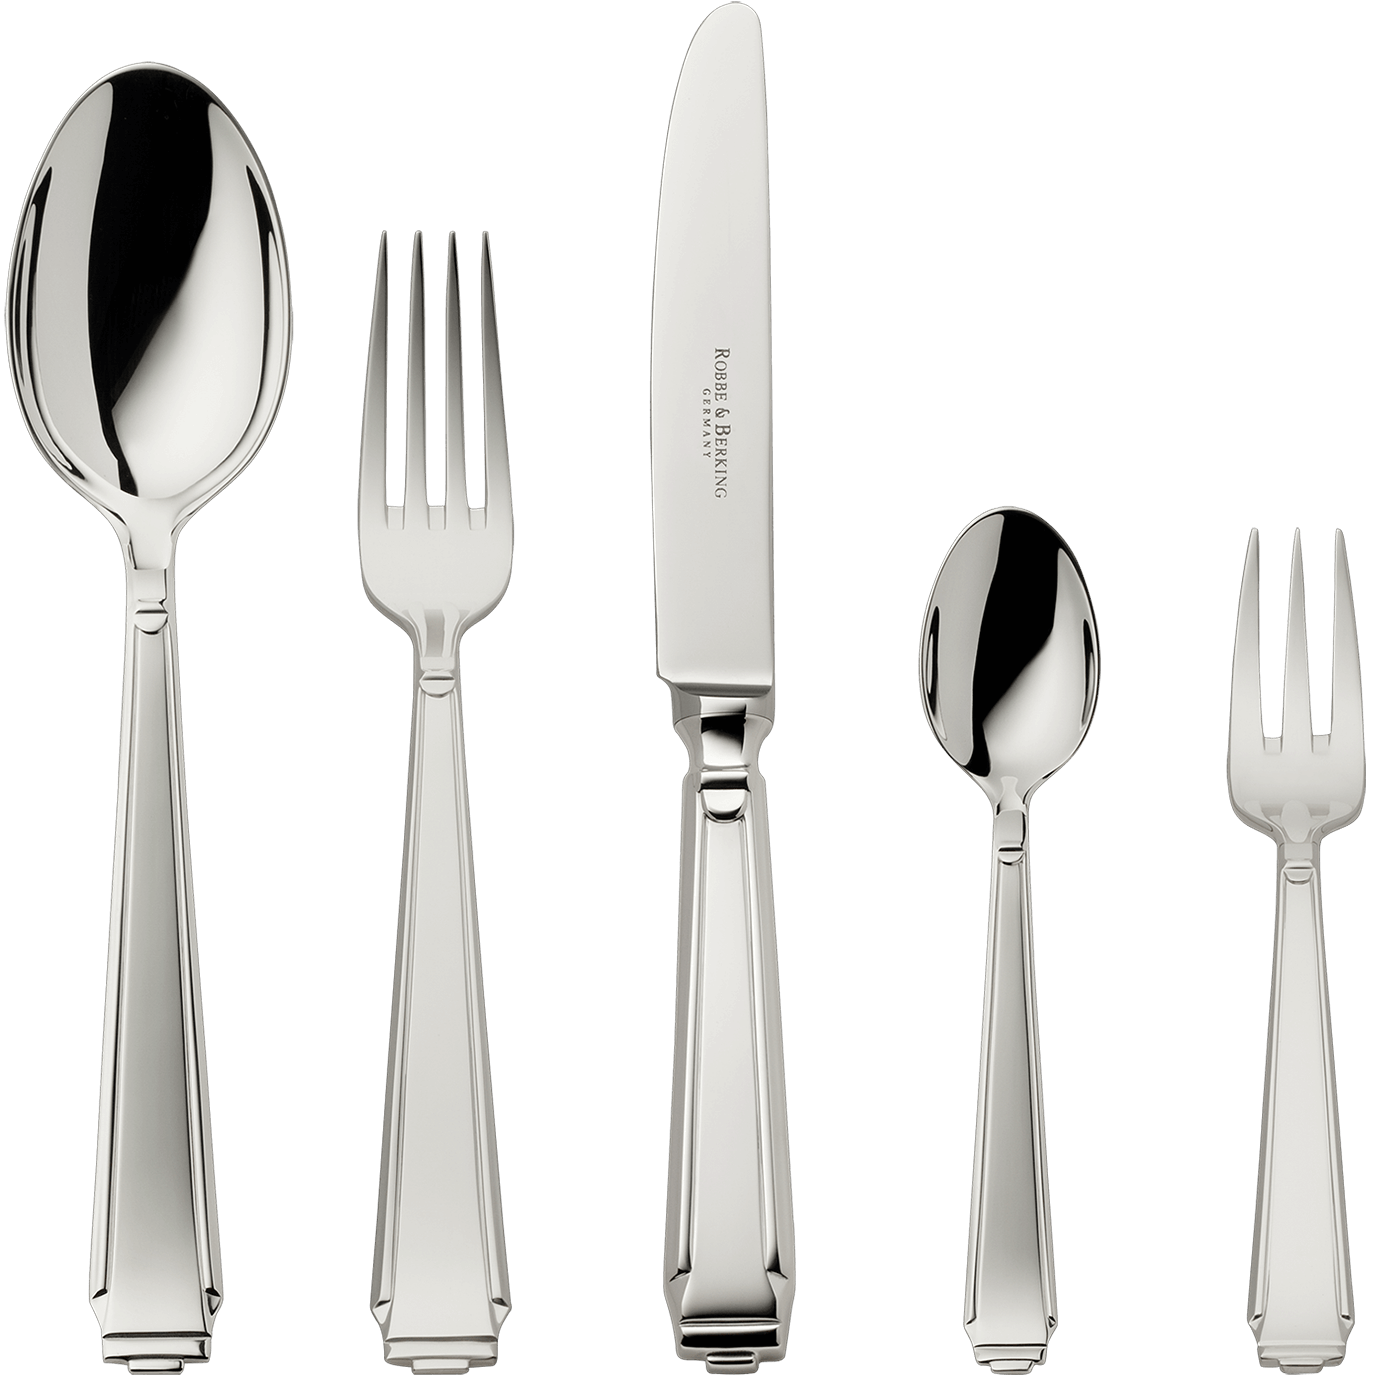 Art Deco Royal Silverplate Pastry Fork Set of 6 by Robbe & Berking Germany